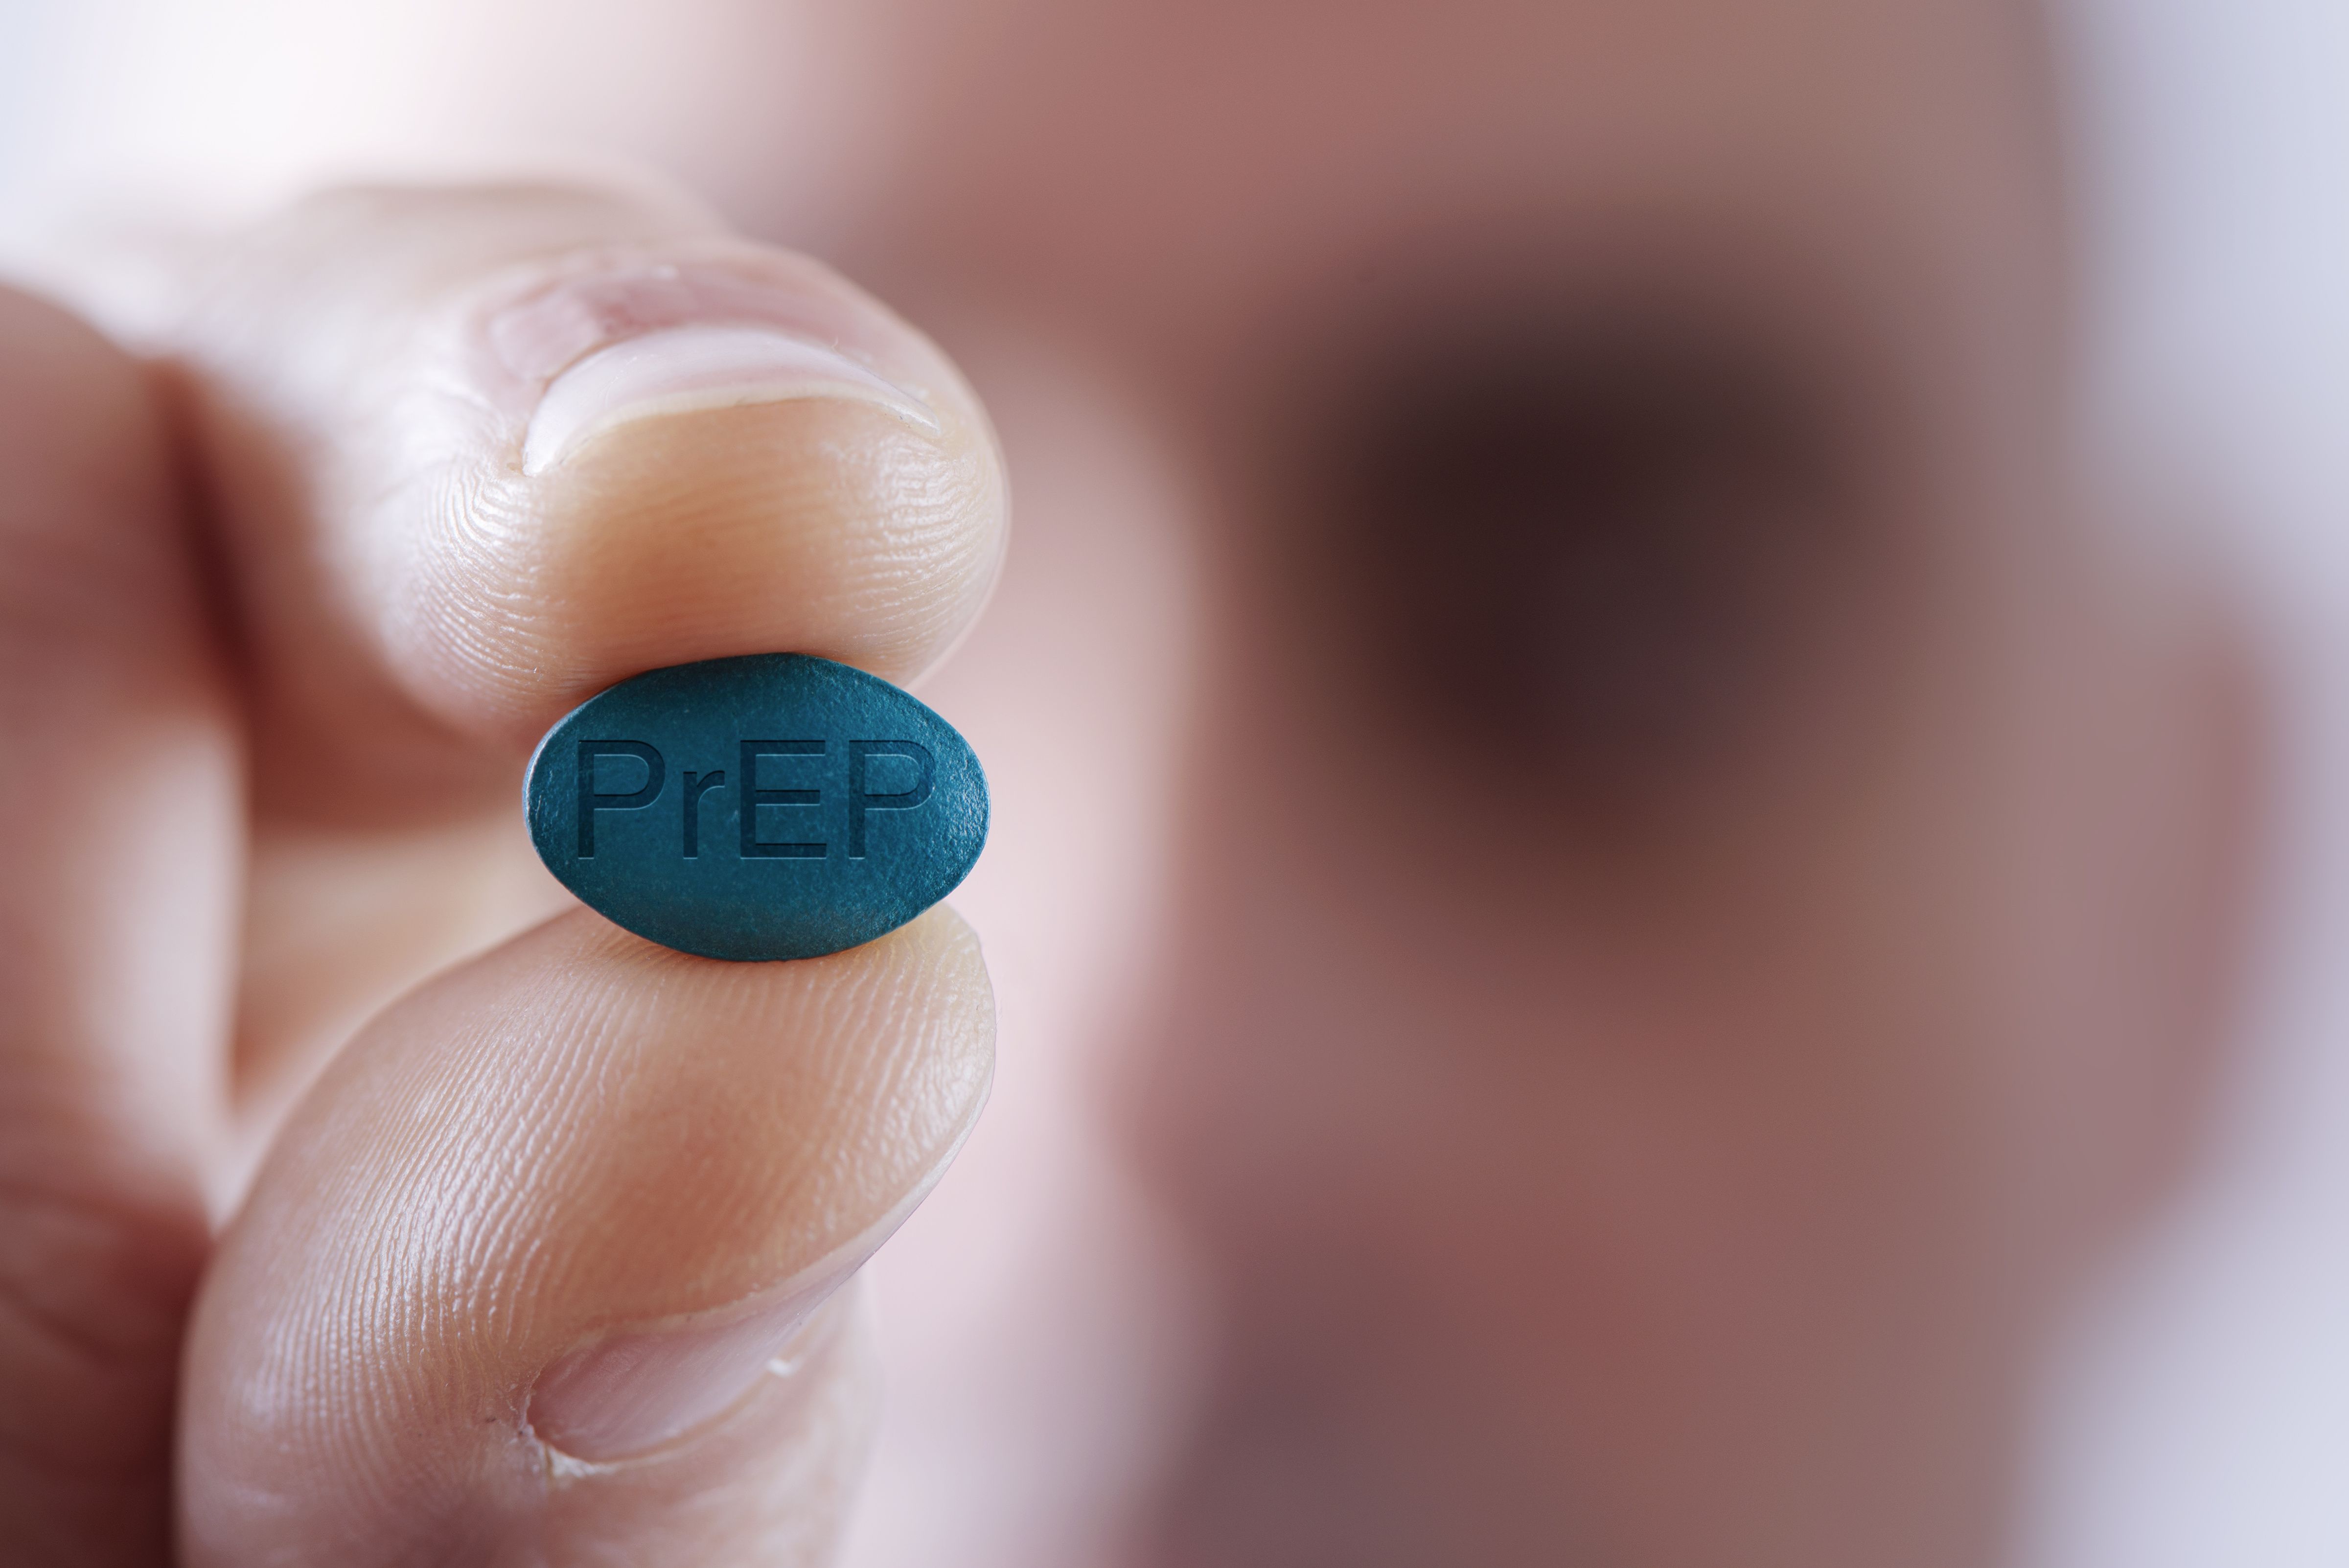 One study presented at CROI 2022 found that HIV PrEP awareness increased among Latinx/Hispanic men who have sex with men, but usage has remained relatively stable for several years.